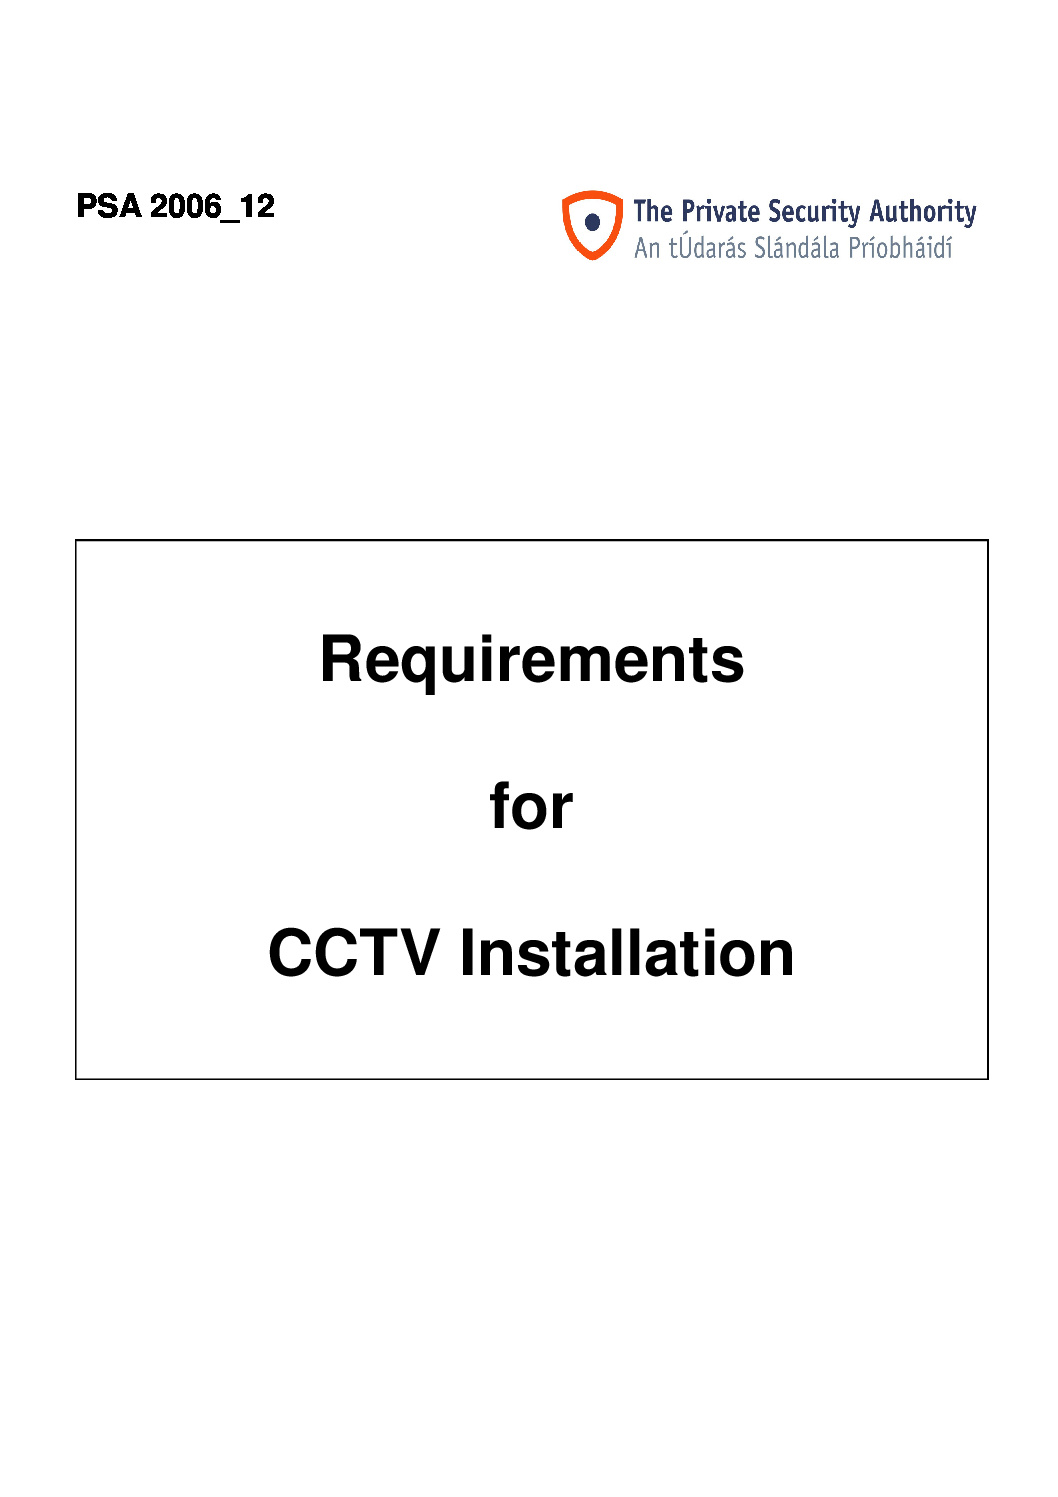 Requirements for CCTV Installation